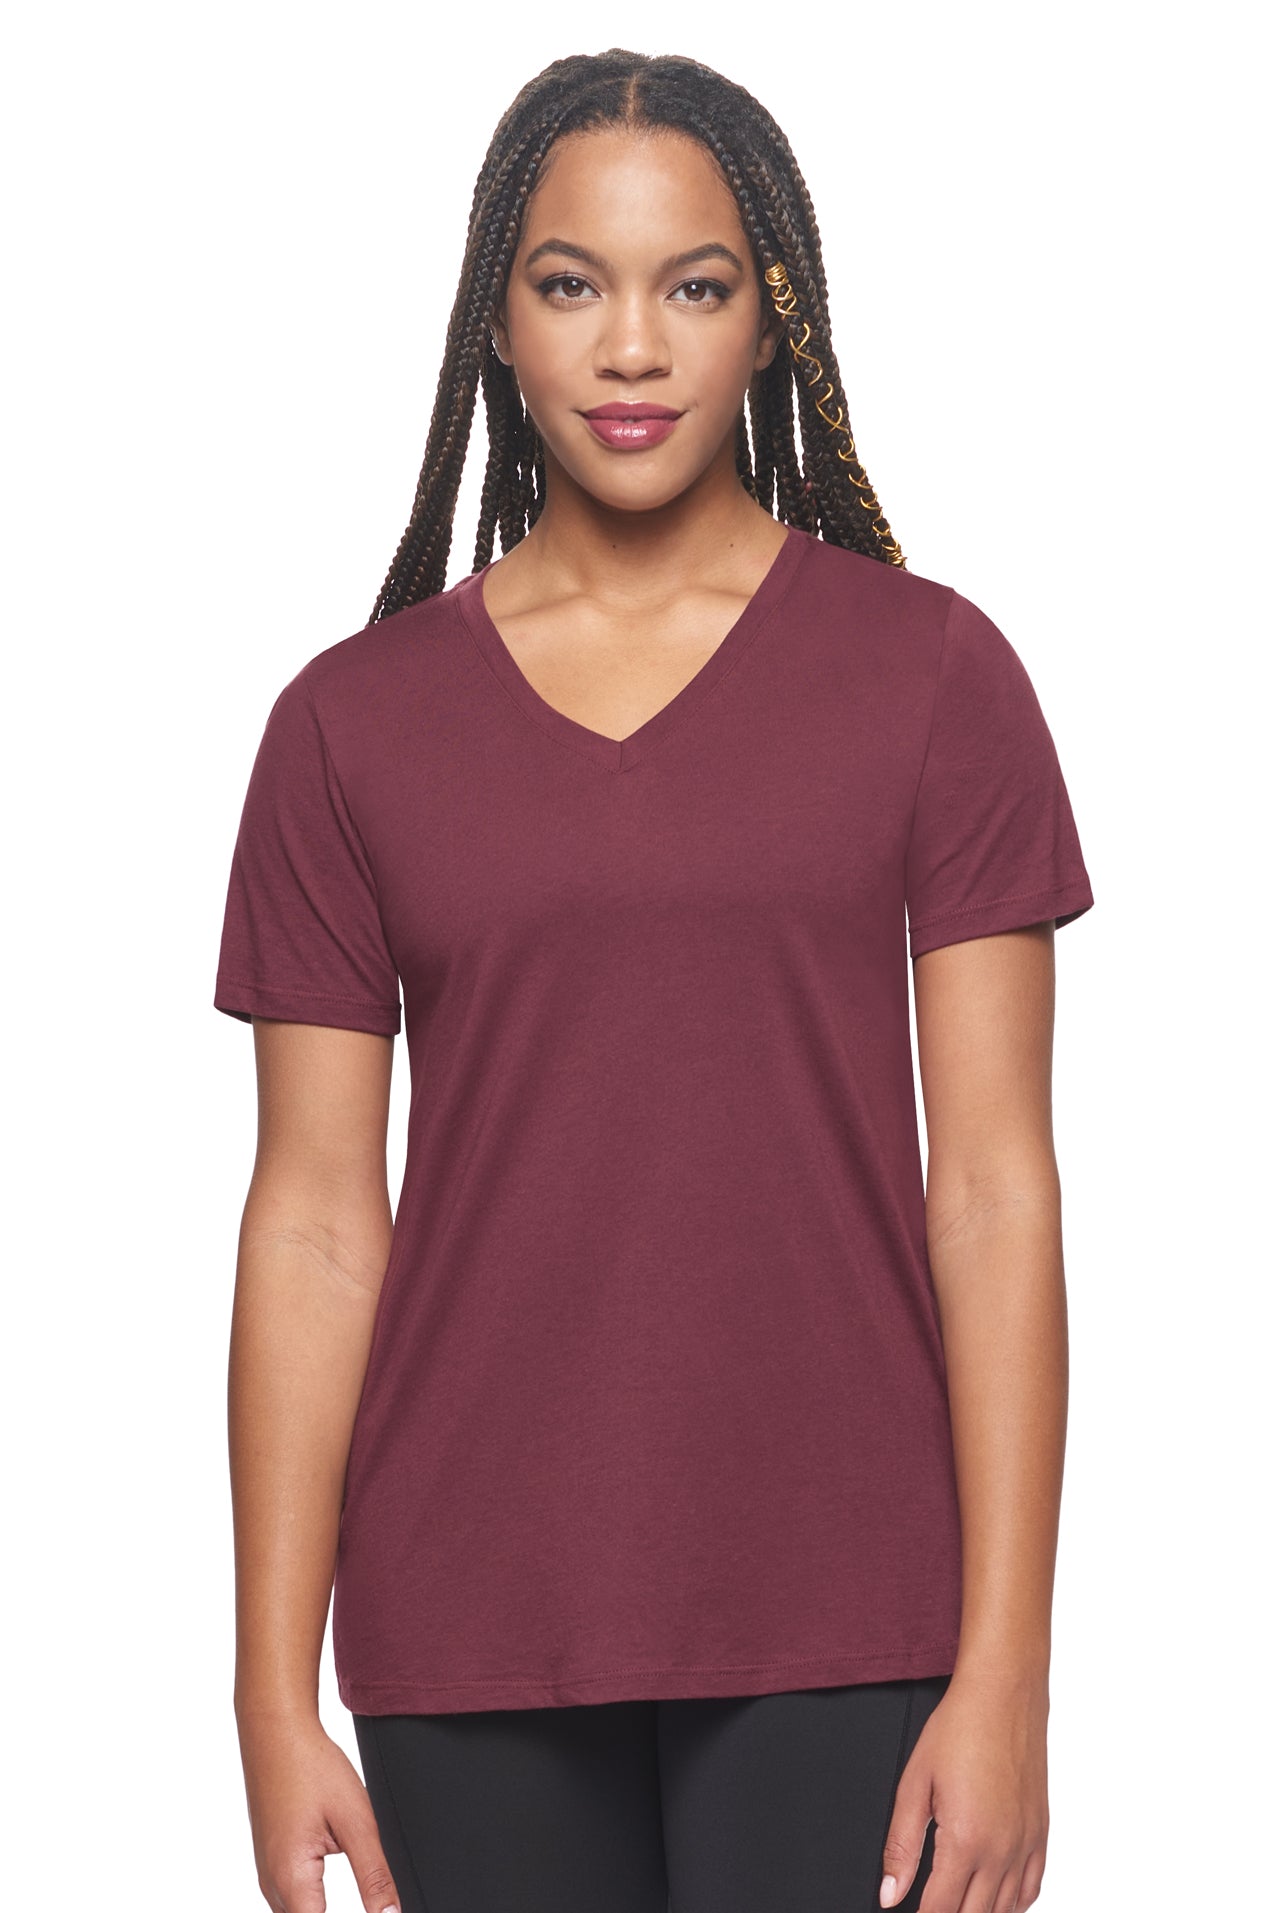 Expert Brand Retail Sustainable Eco-Friendly Micromodal Cotton Women's V-neck T-shirt Made in the USA maroon#color_maroon